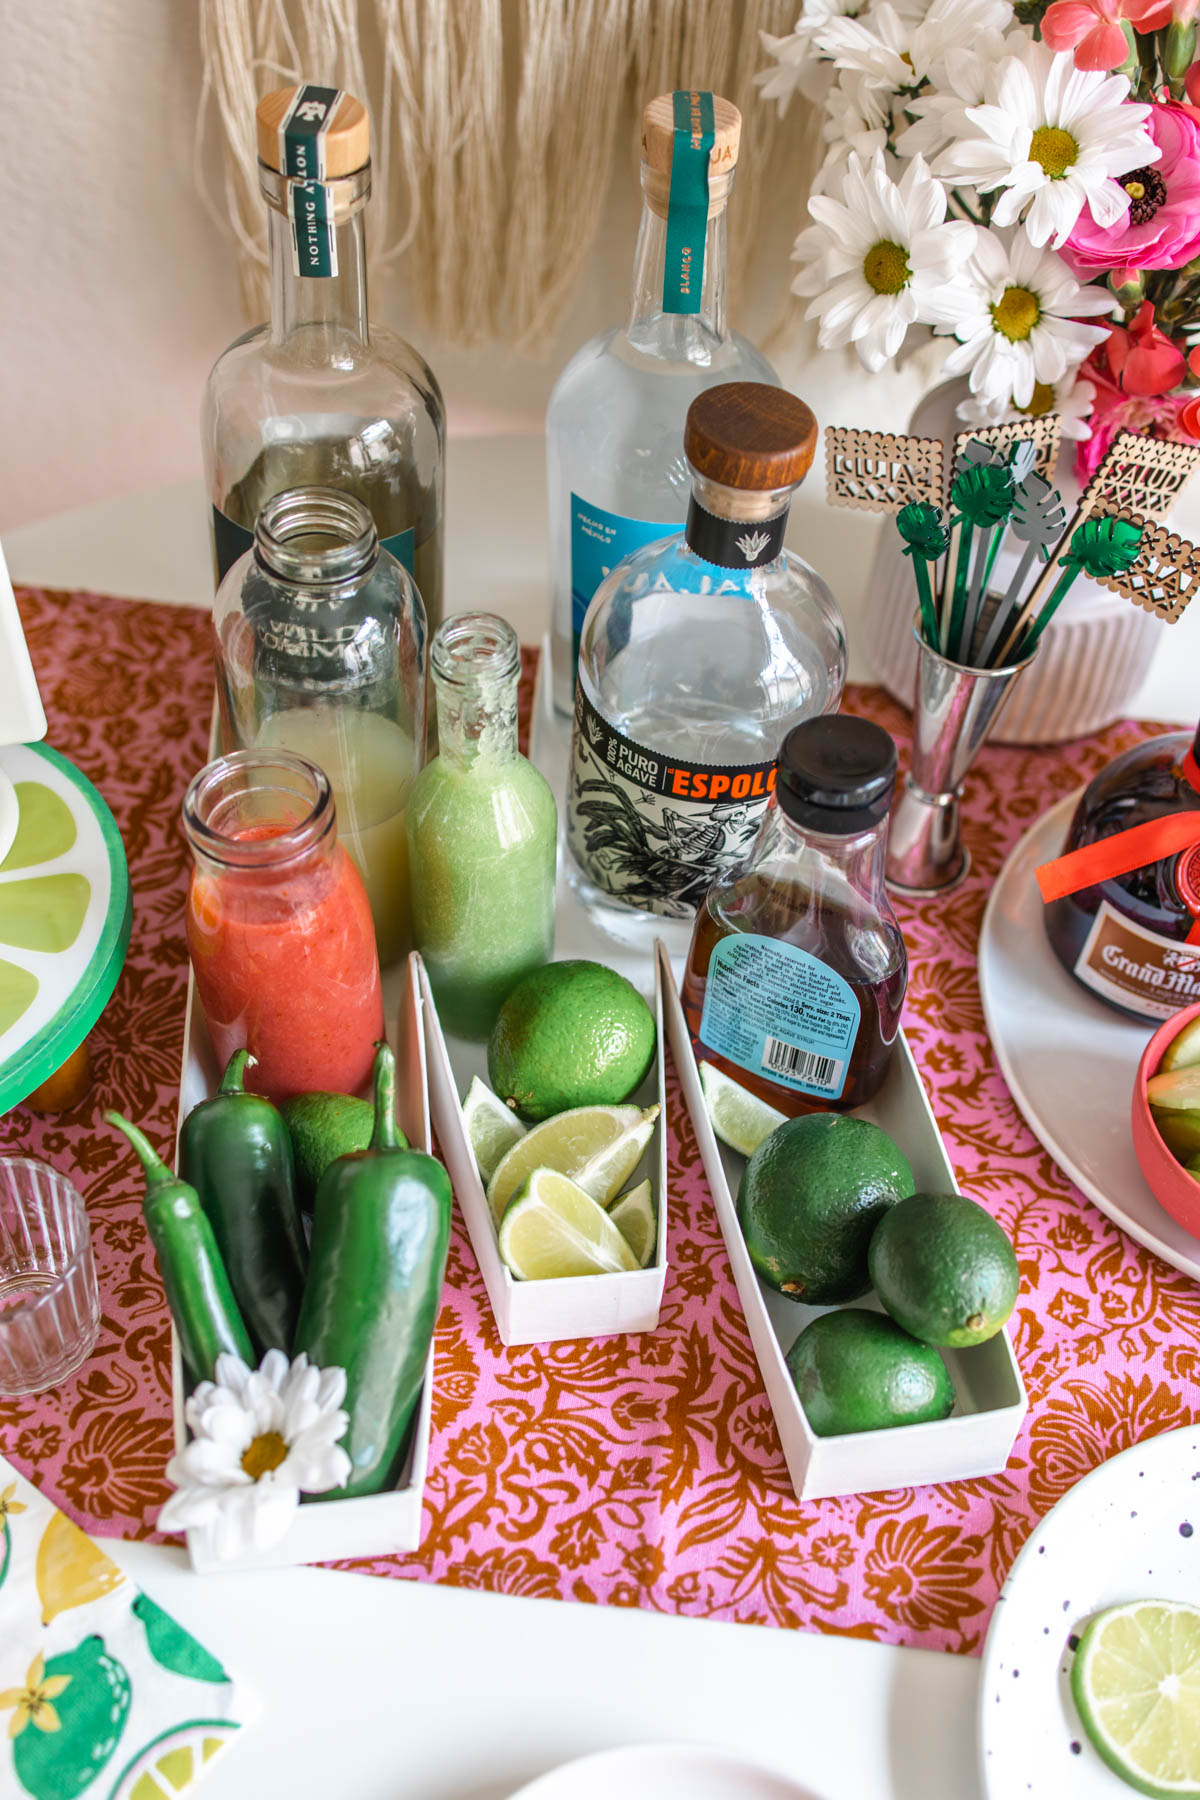 A photo of tequila bottles, agave, simple syrup, and cucumber and strawberry purees along with whole lime and peppers as well as sliced limes inside rectangular boxes.